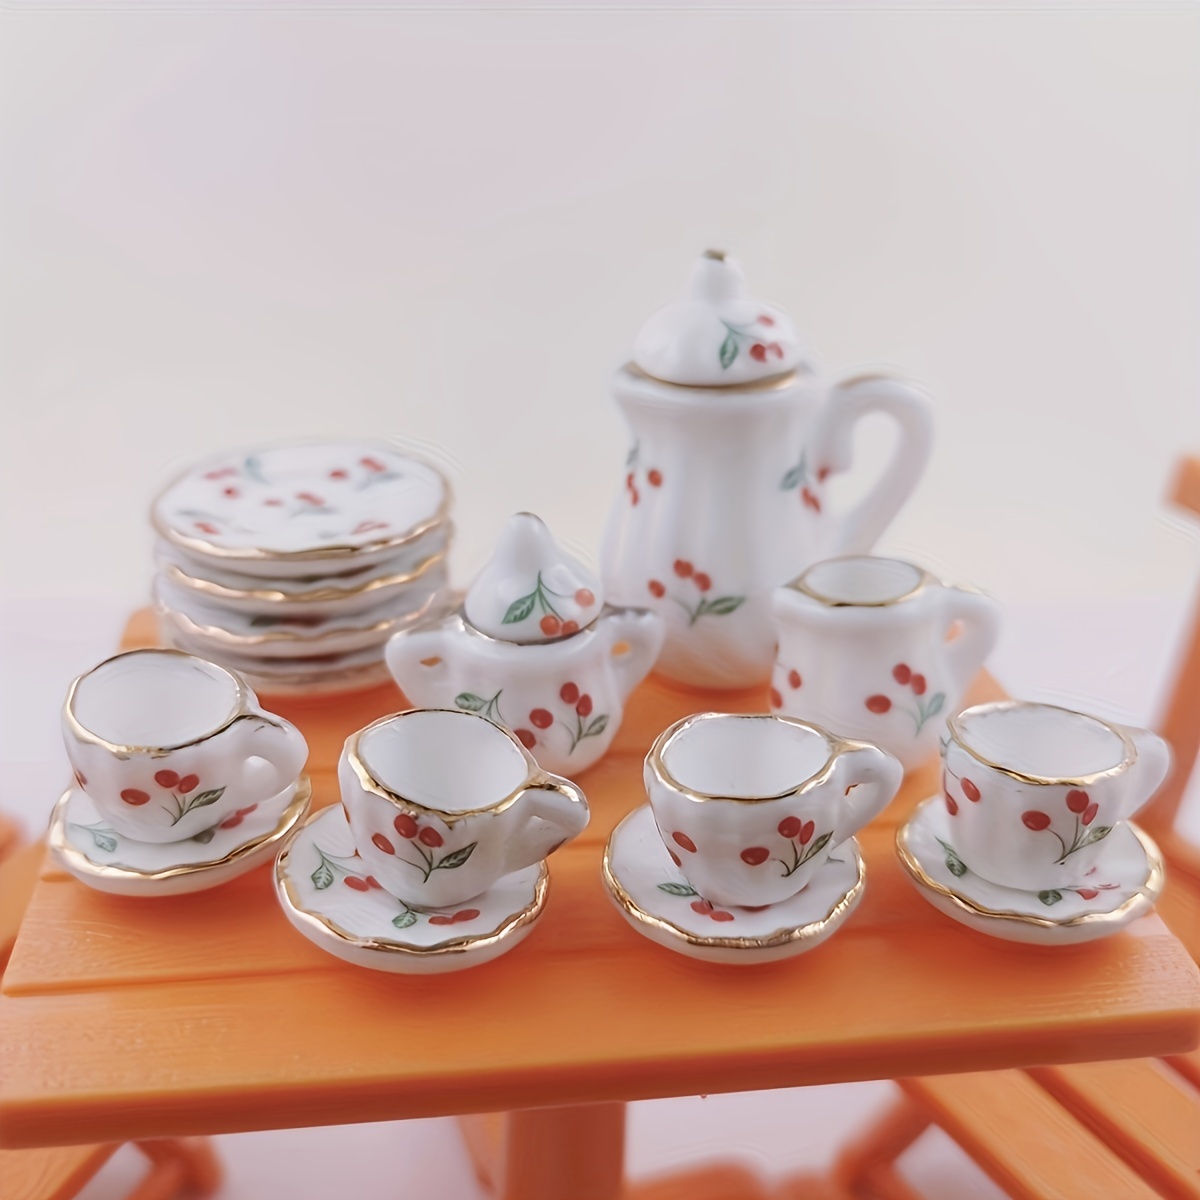 

1:12 Scale Miniature Chinese Ceramic Tea Set With 15 Pieces, Floral Pattern Resin Kitchen Porcelain Accessories For Dollhouse Home Decor Gifts.